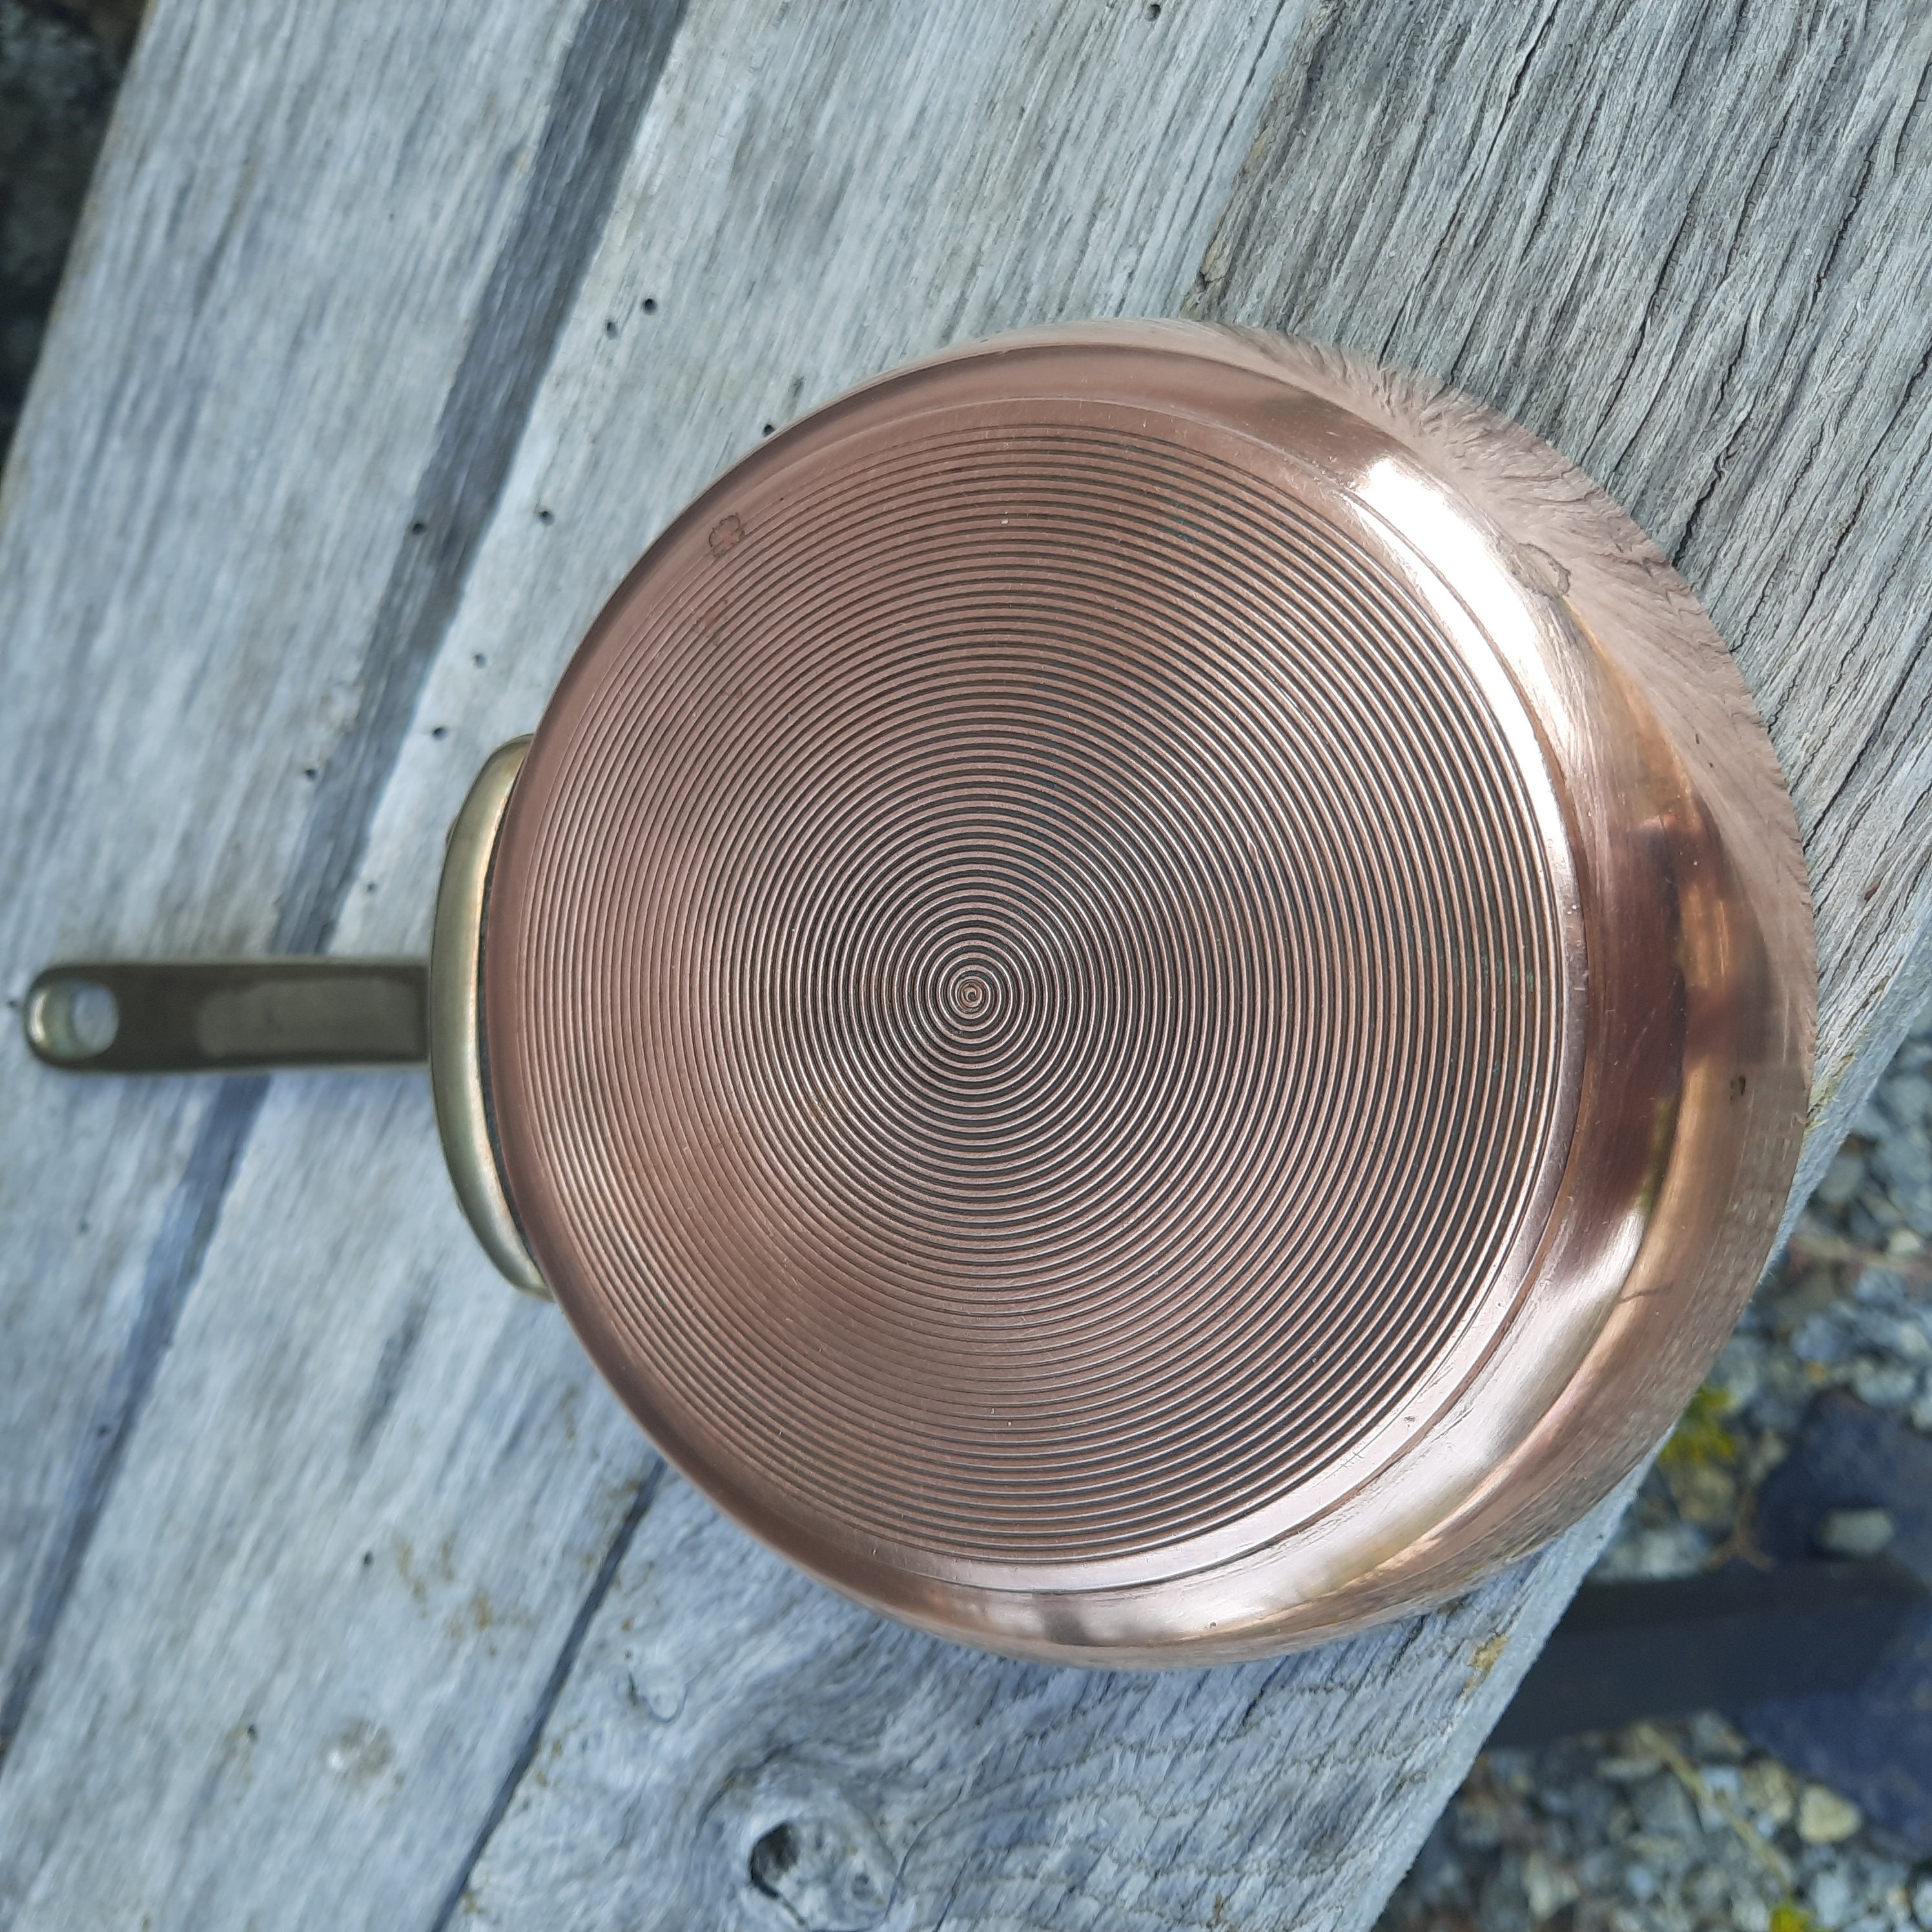 Small Hammered Copper Saucepan 4.7 - Chef Tool